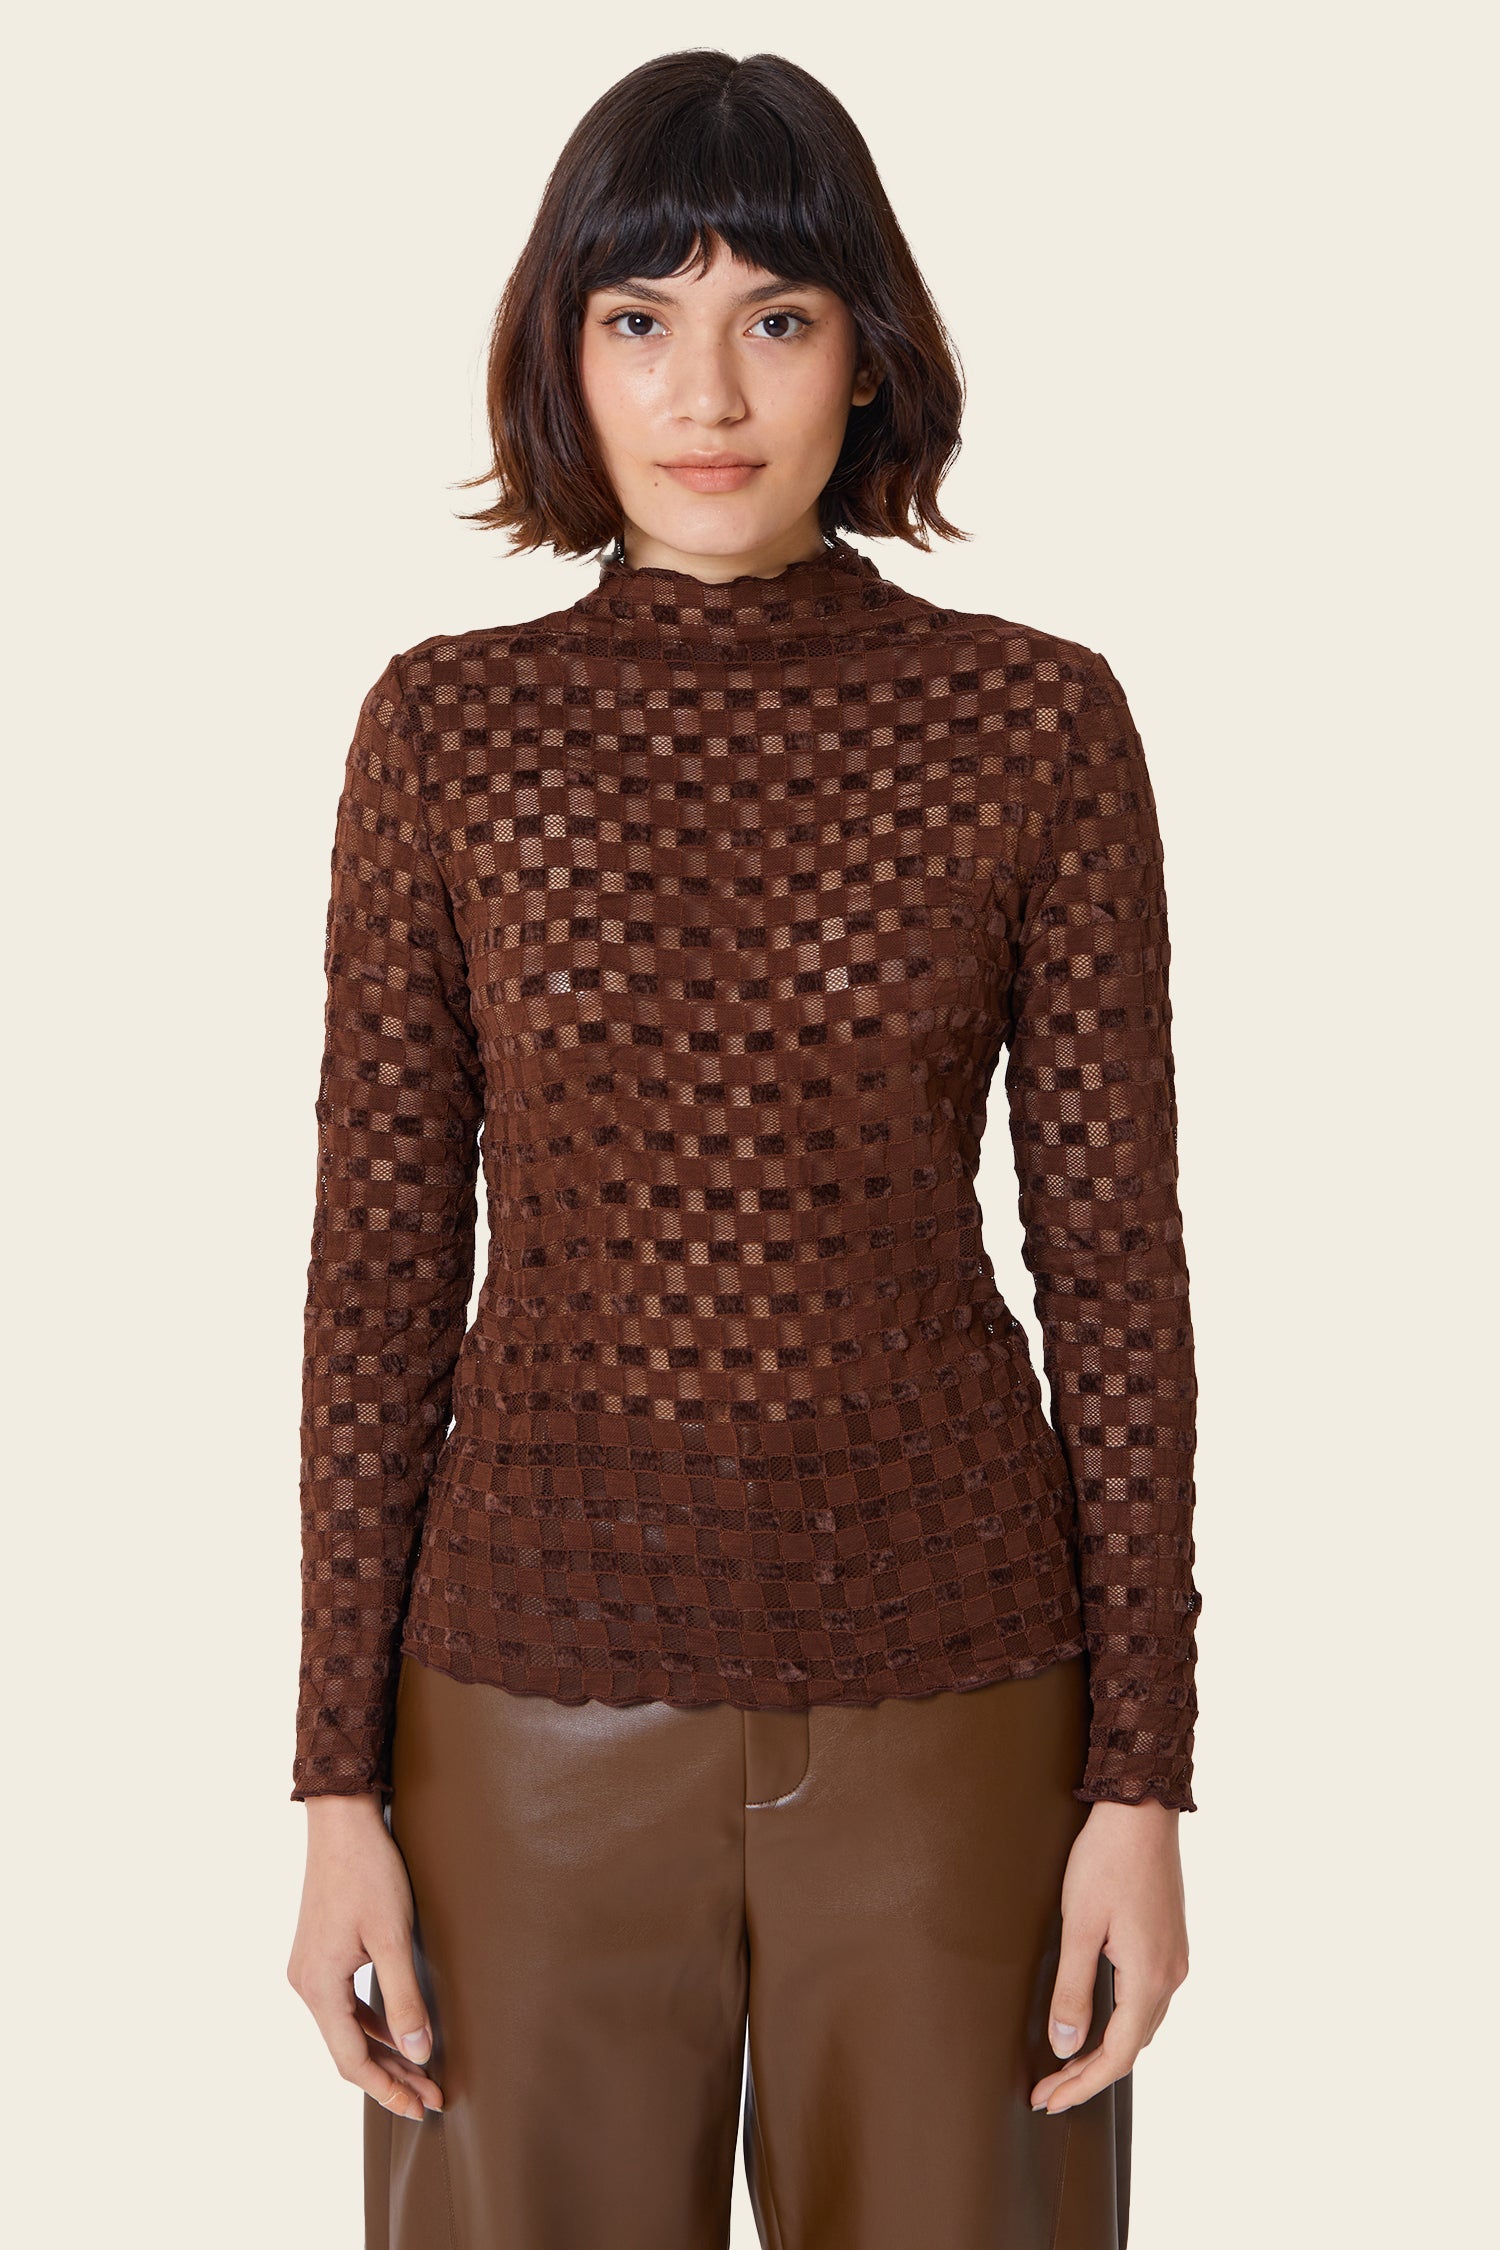 Find Me Now Harmony Checkered Mesh Top Chocolate Lab